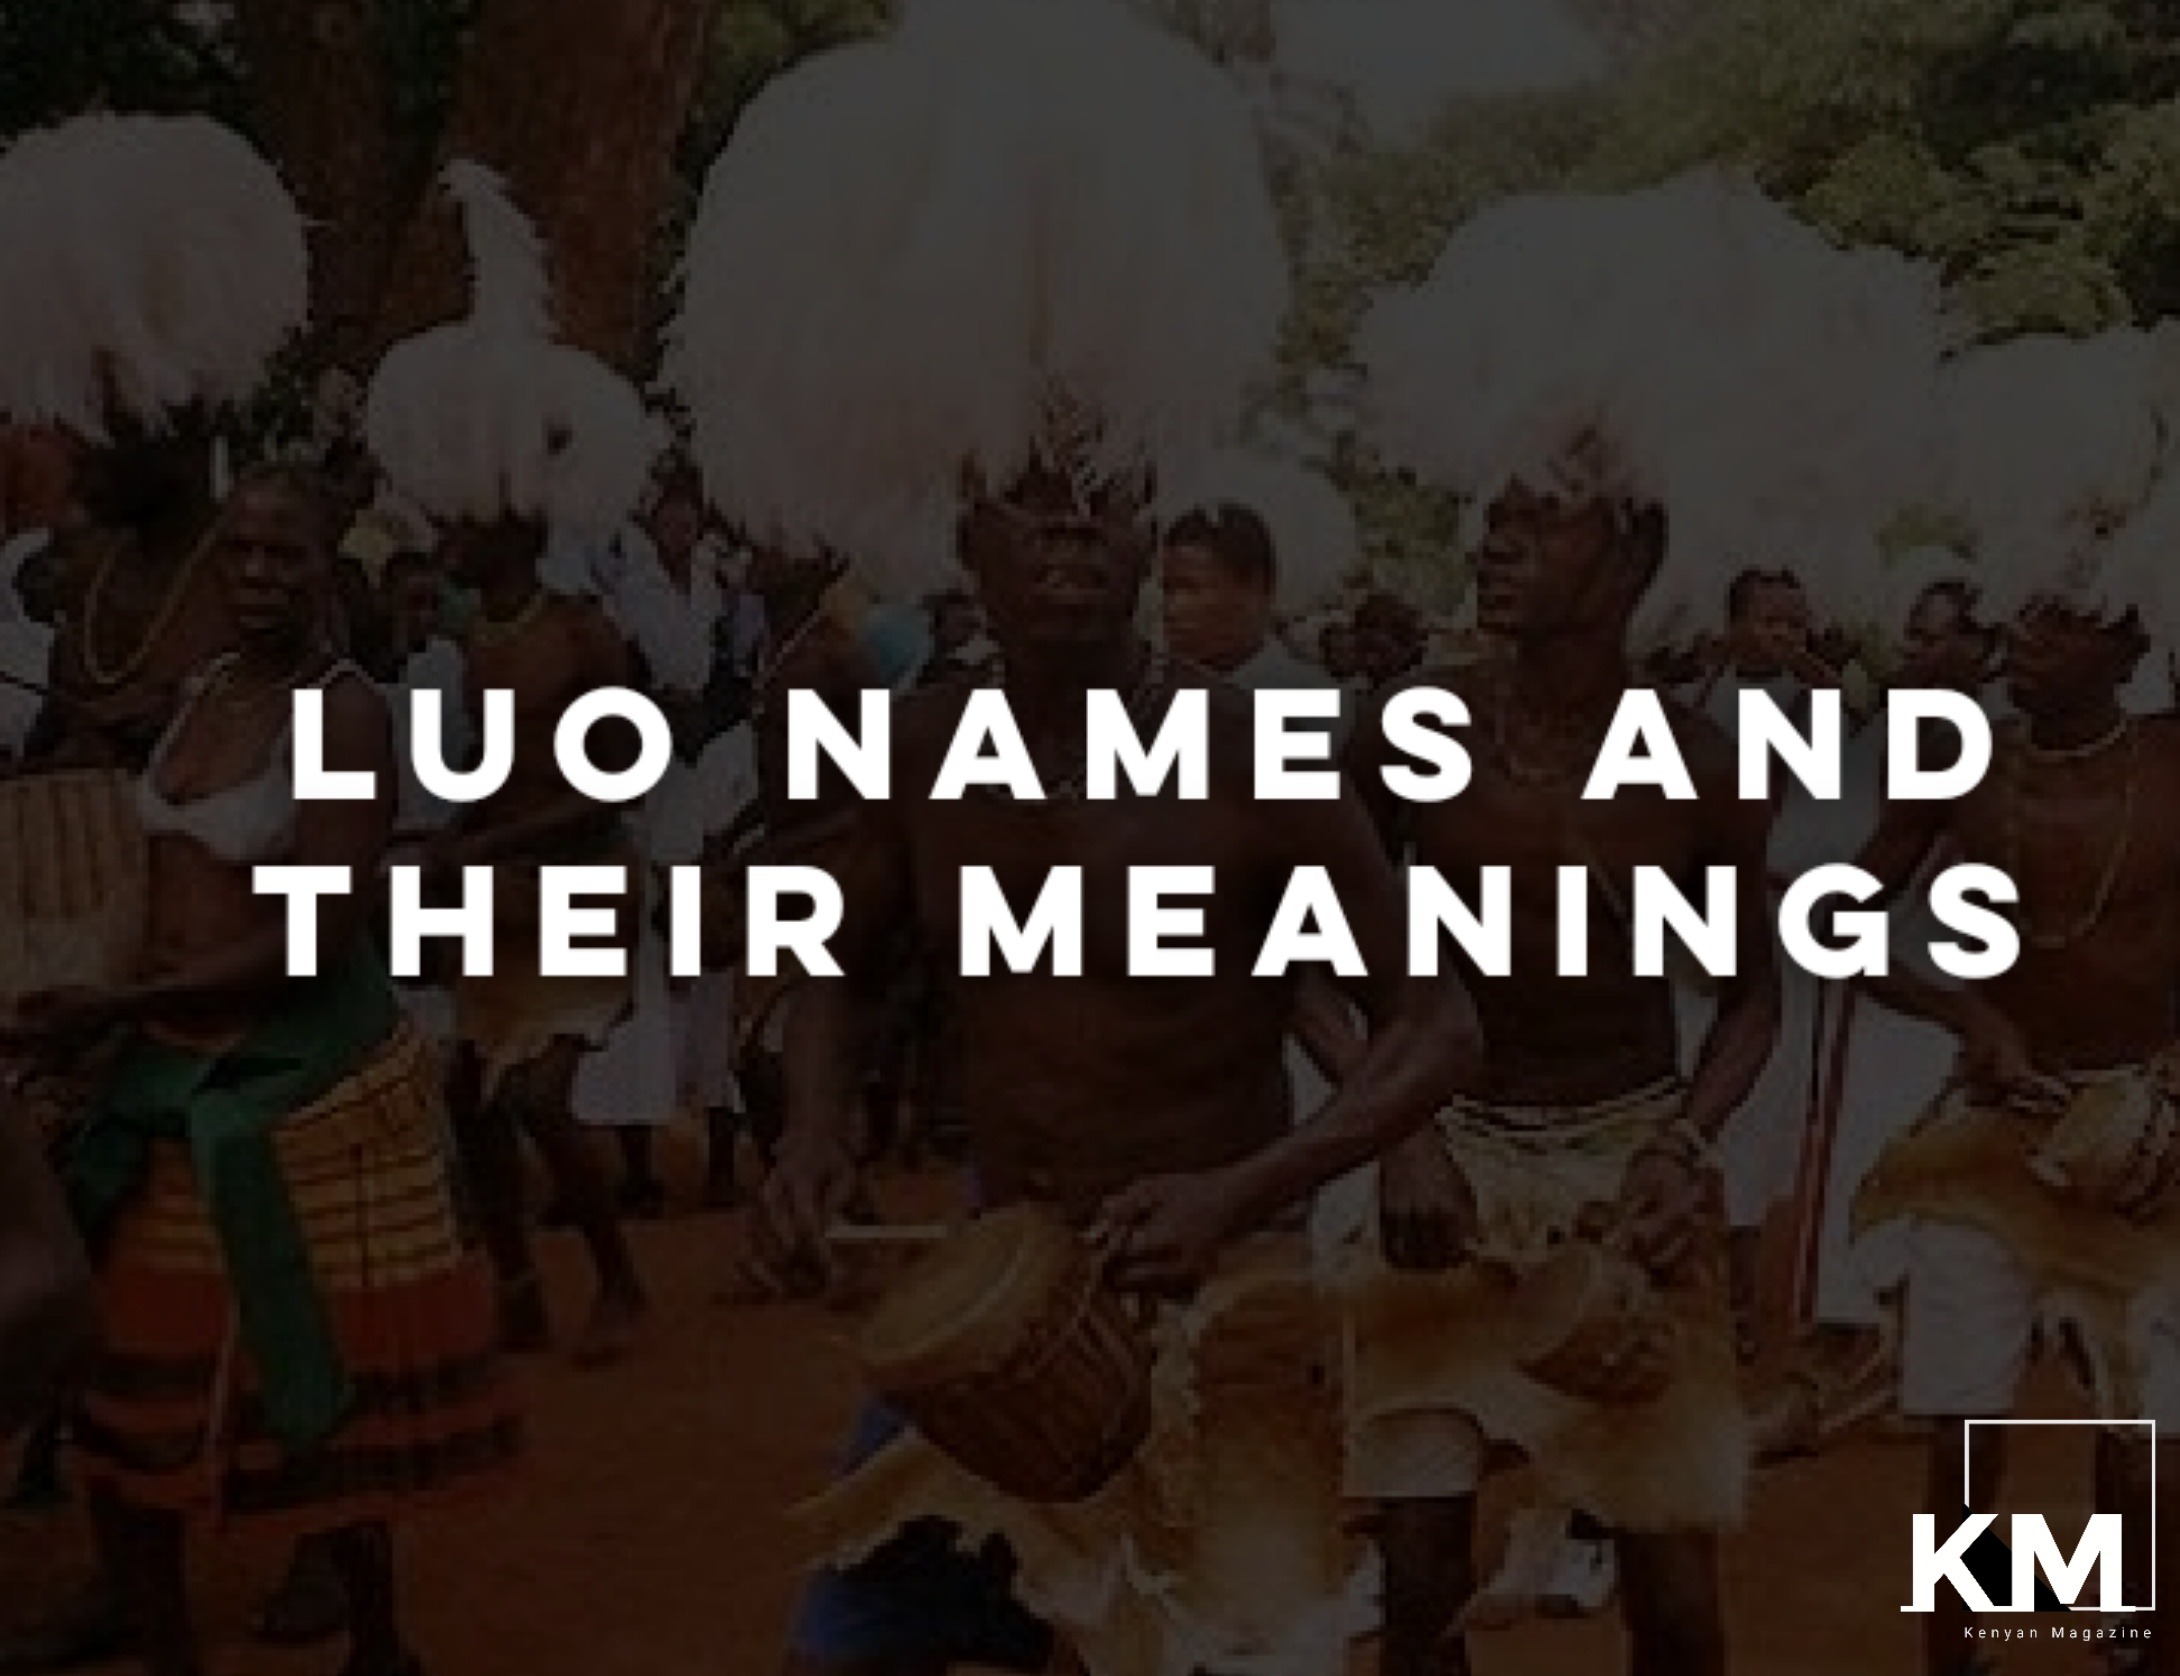 Luo names and their meanings